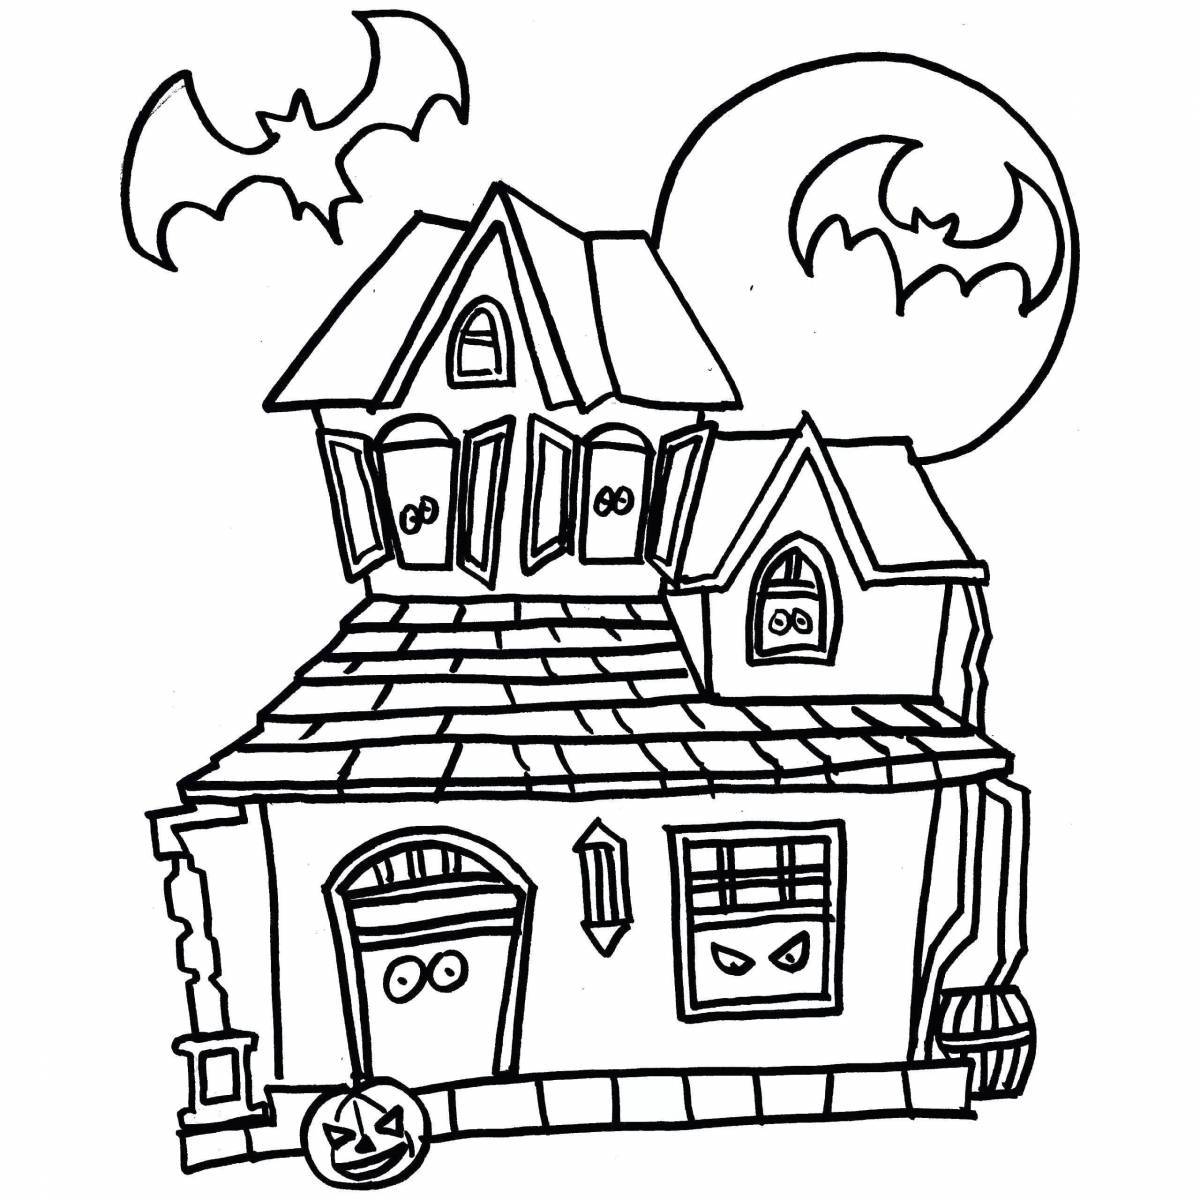 Awesome house coloring pages